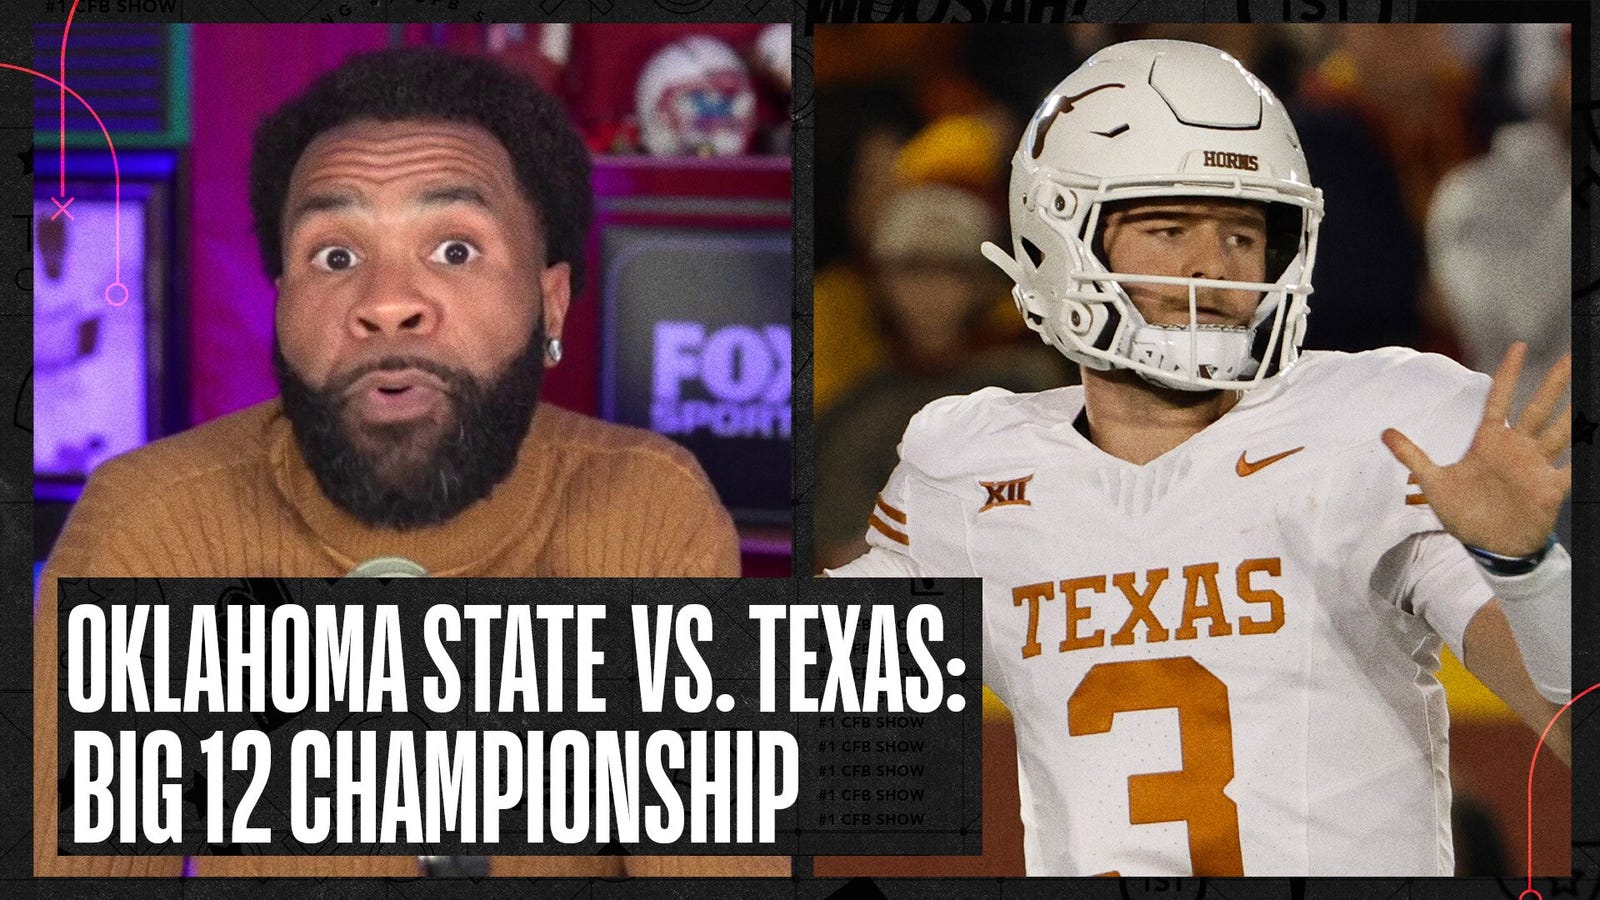 Previewing the battle for the Big 12 Championship